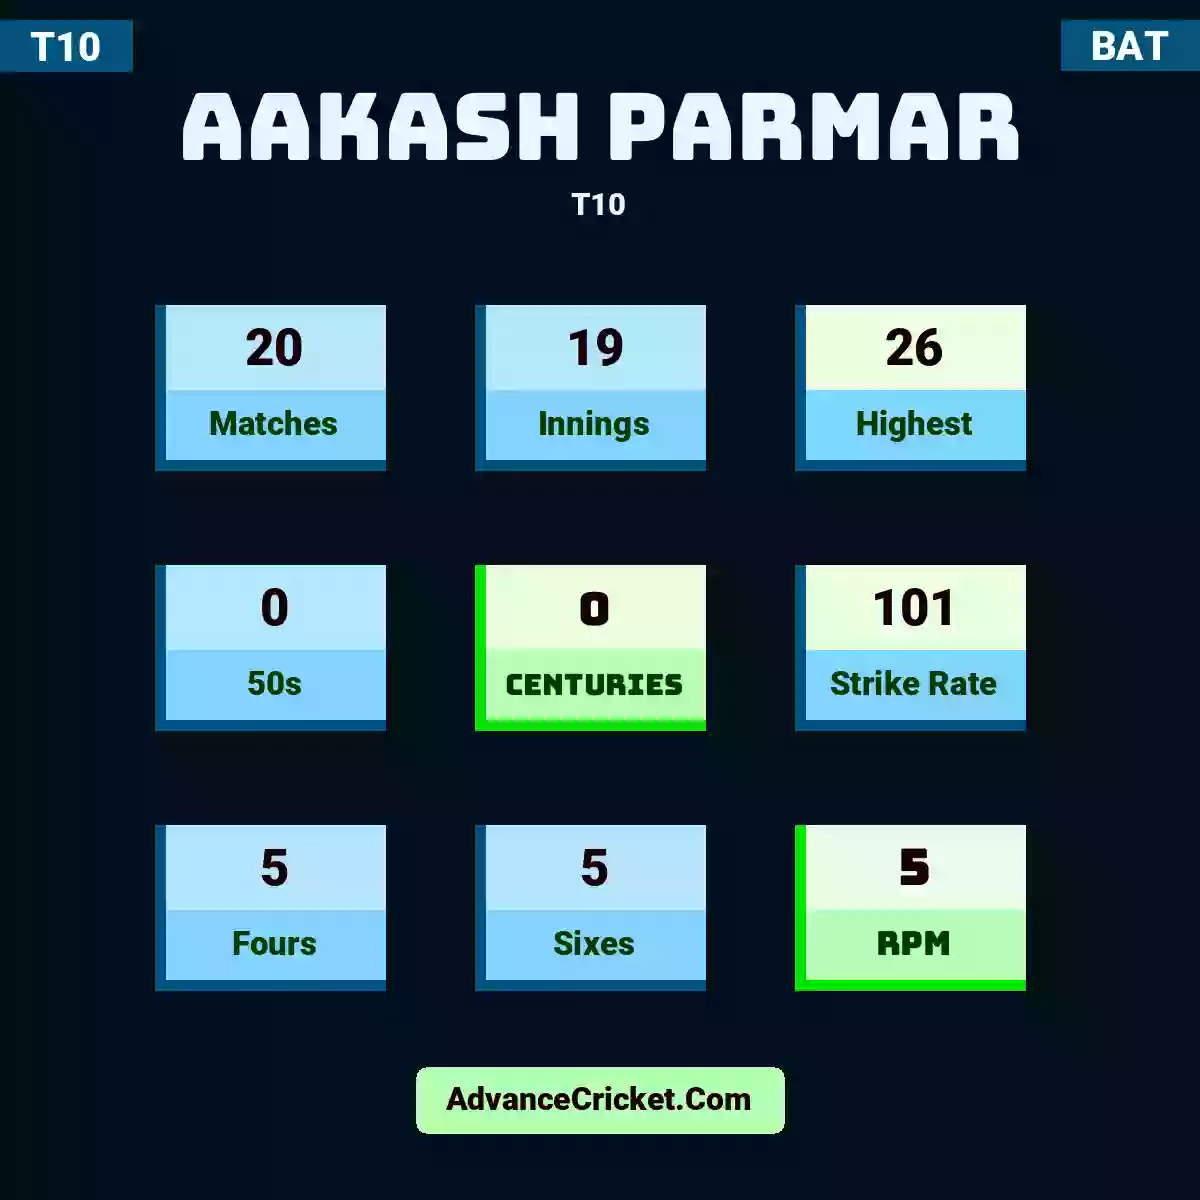 Aakash Parmar T10 , Aakash Parmar played 20 matches, scored 26 runs as highest, 0 half-centuries, and 0 centuries, with a strike rate of 101. A.Parmar hit 5 fours and 5 sixes, with an RPM of 5.